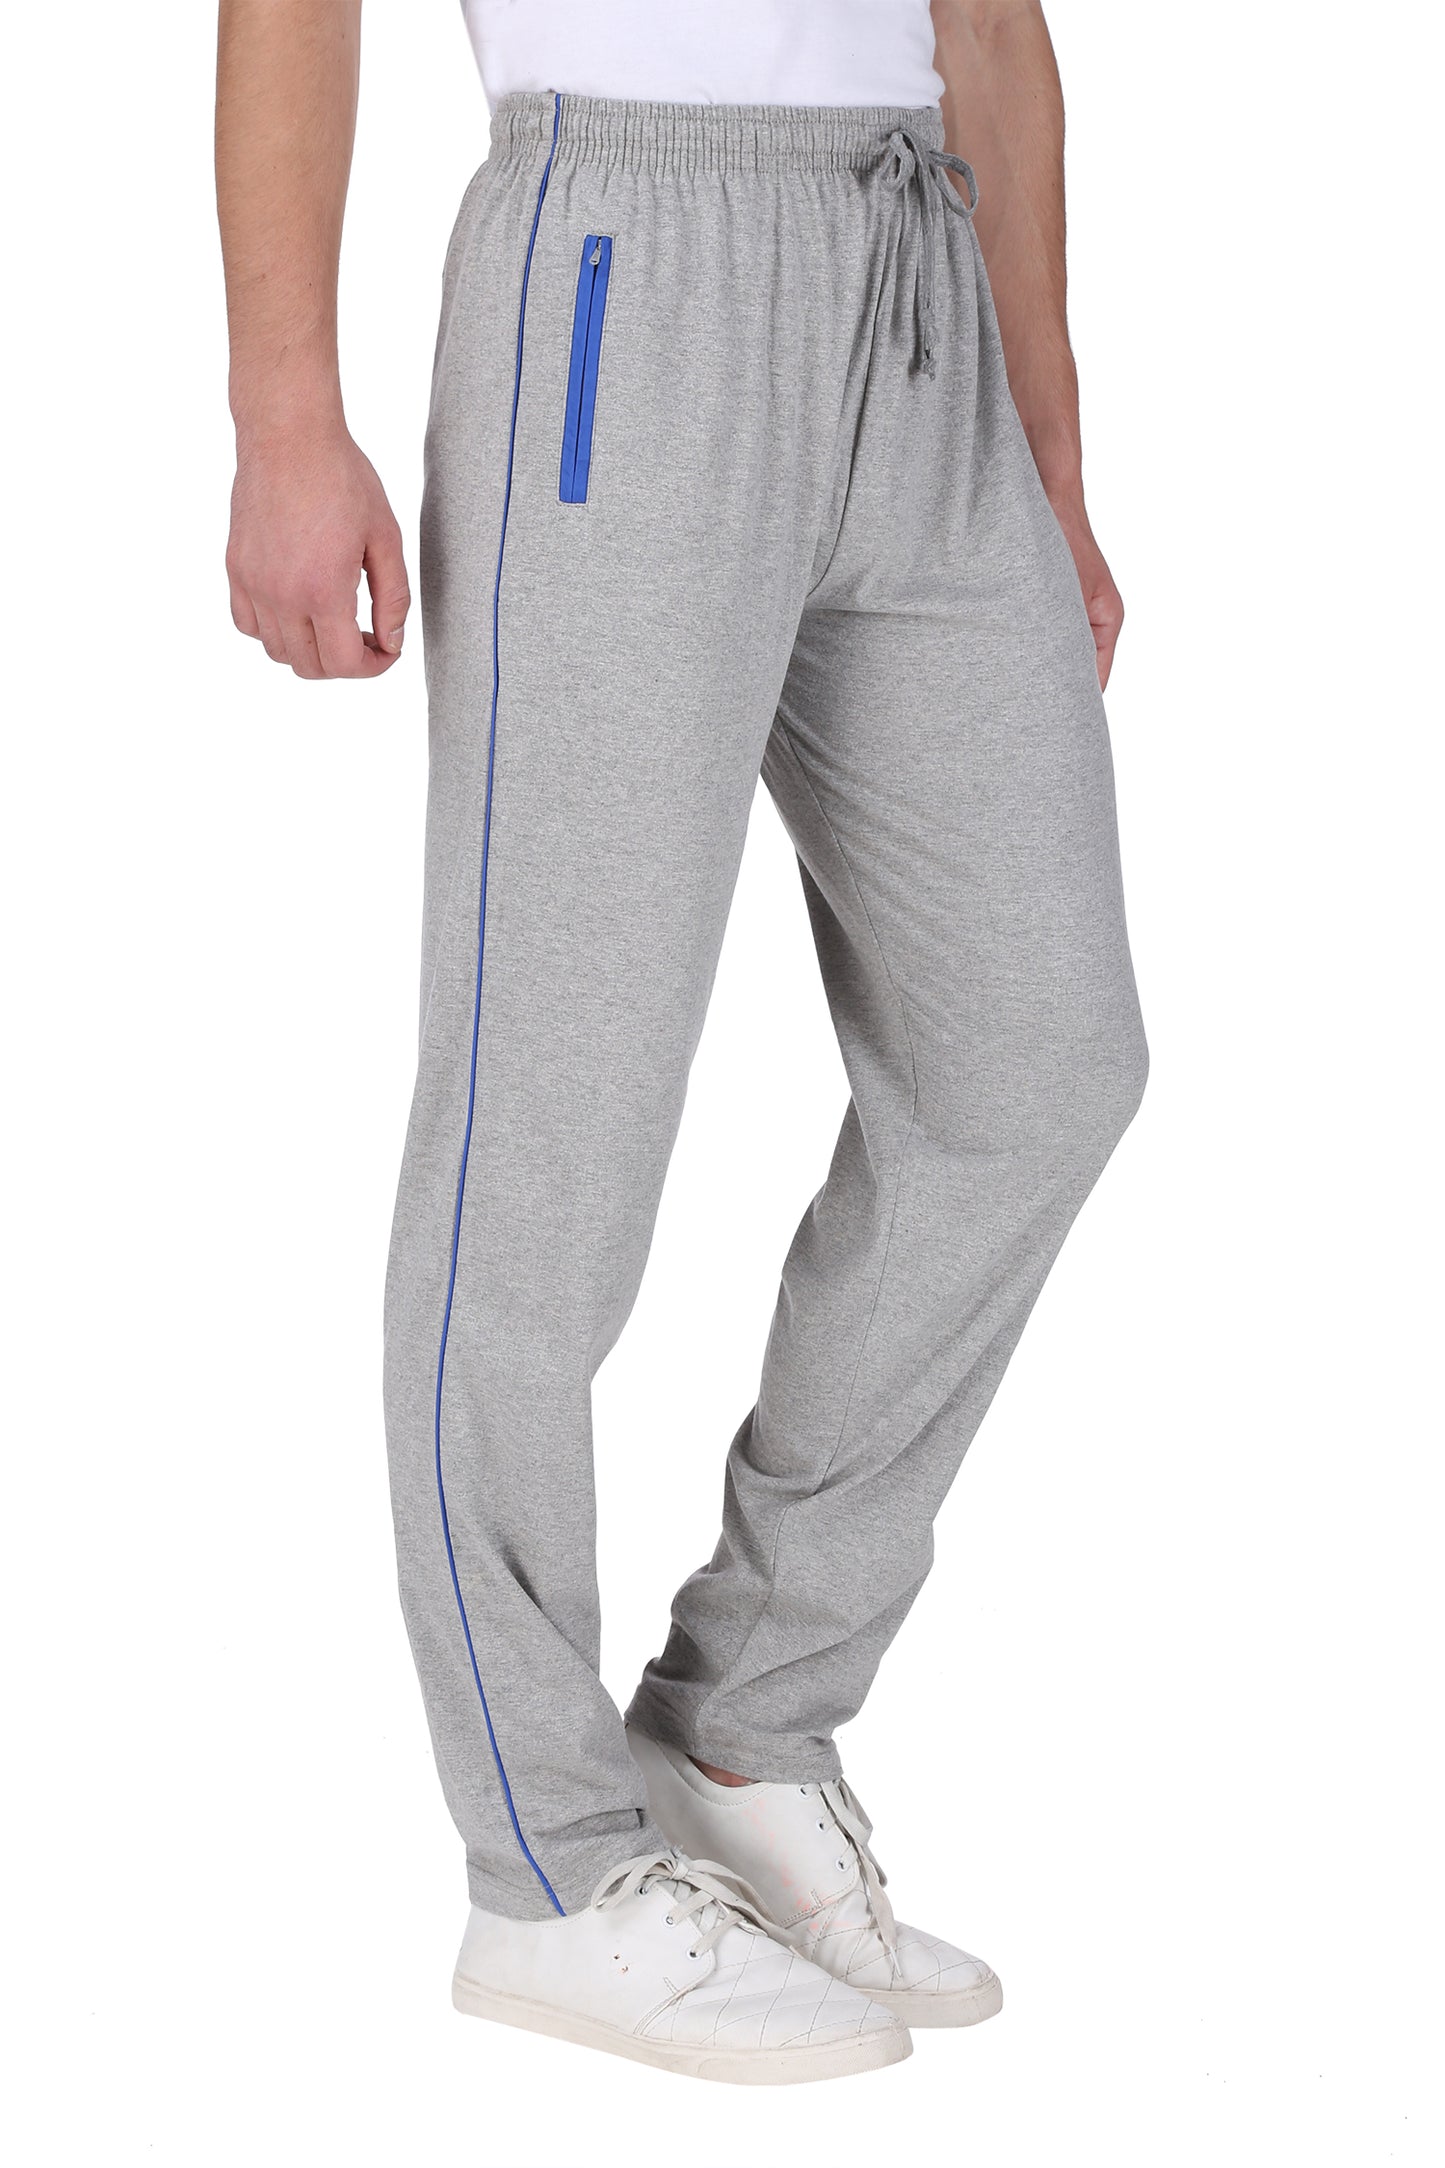 NEO GARMENTS Men's Cotton TRACK PANTS | GREY | SIZES FROM M TO 9XL.